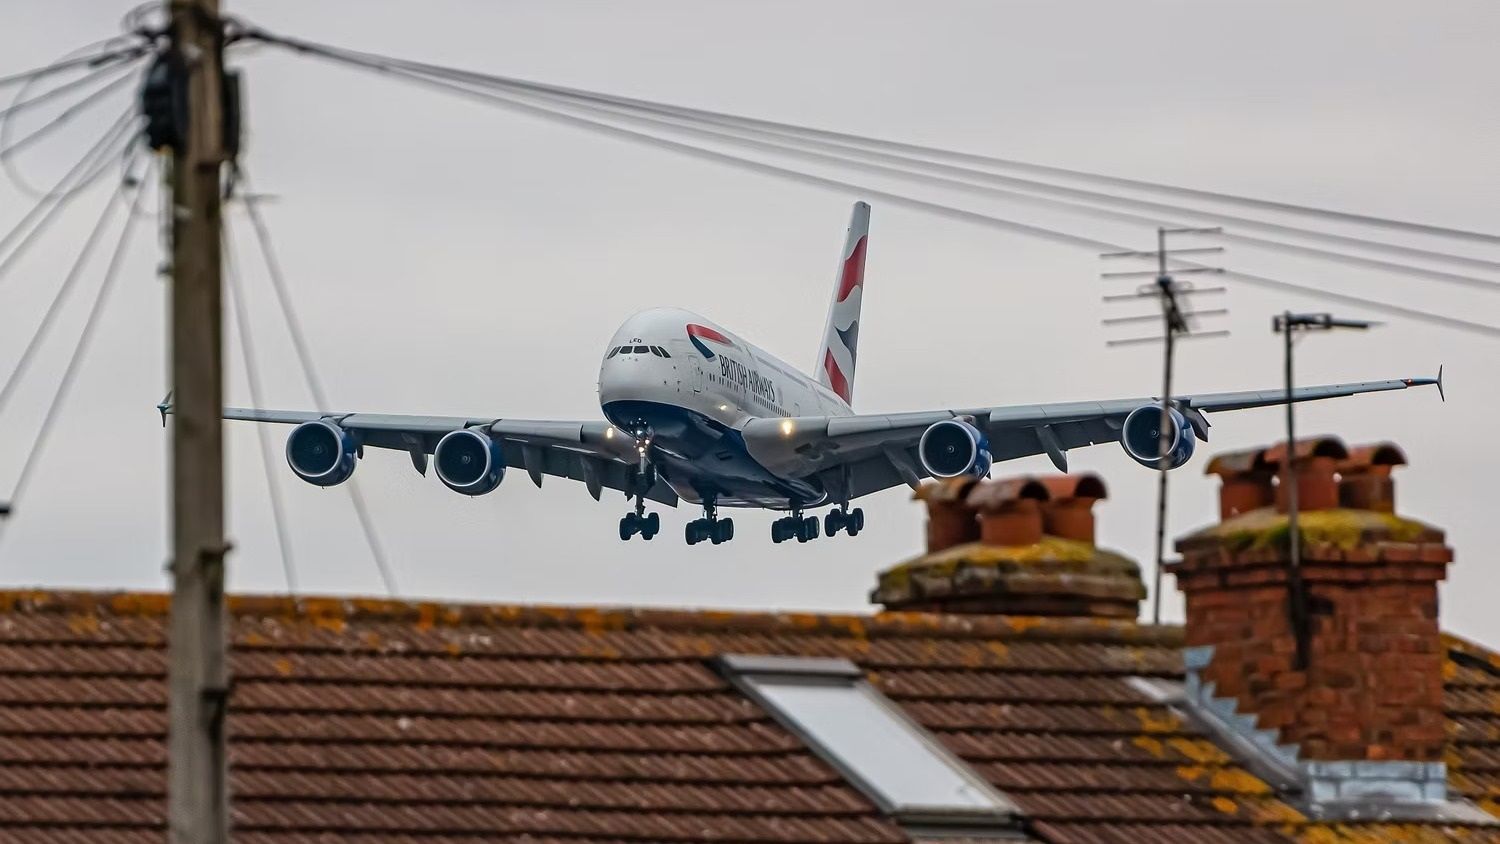 British Airways to double flights from SAN to London Heathrow next April